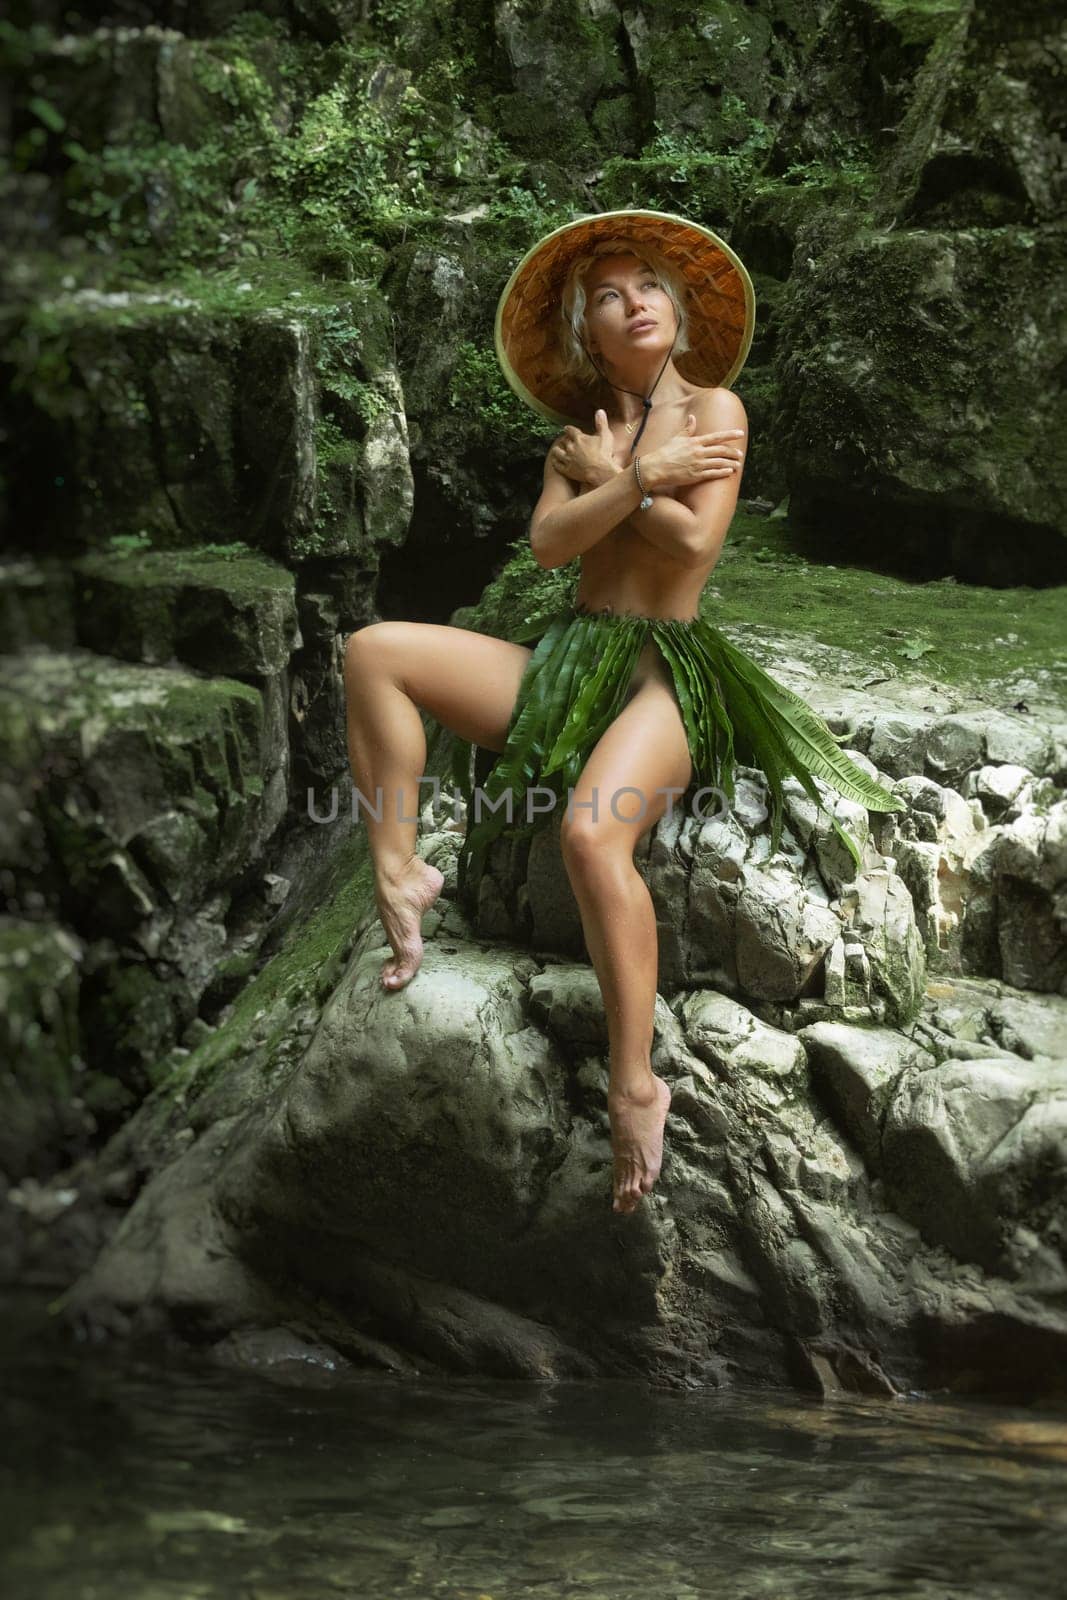 naked sexy girl in a triangular hat and a homemade cape made of leaves stands at the waterfall of a beautiful mountain river